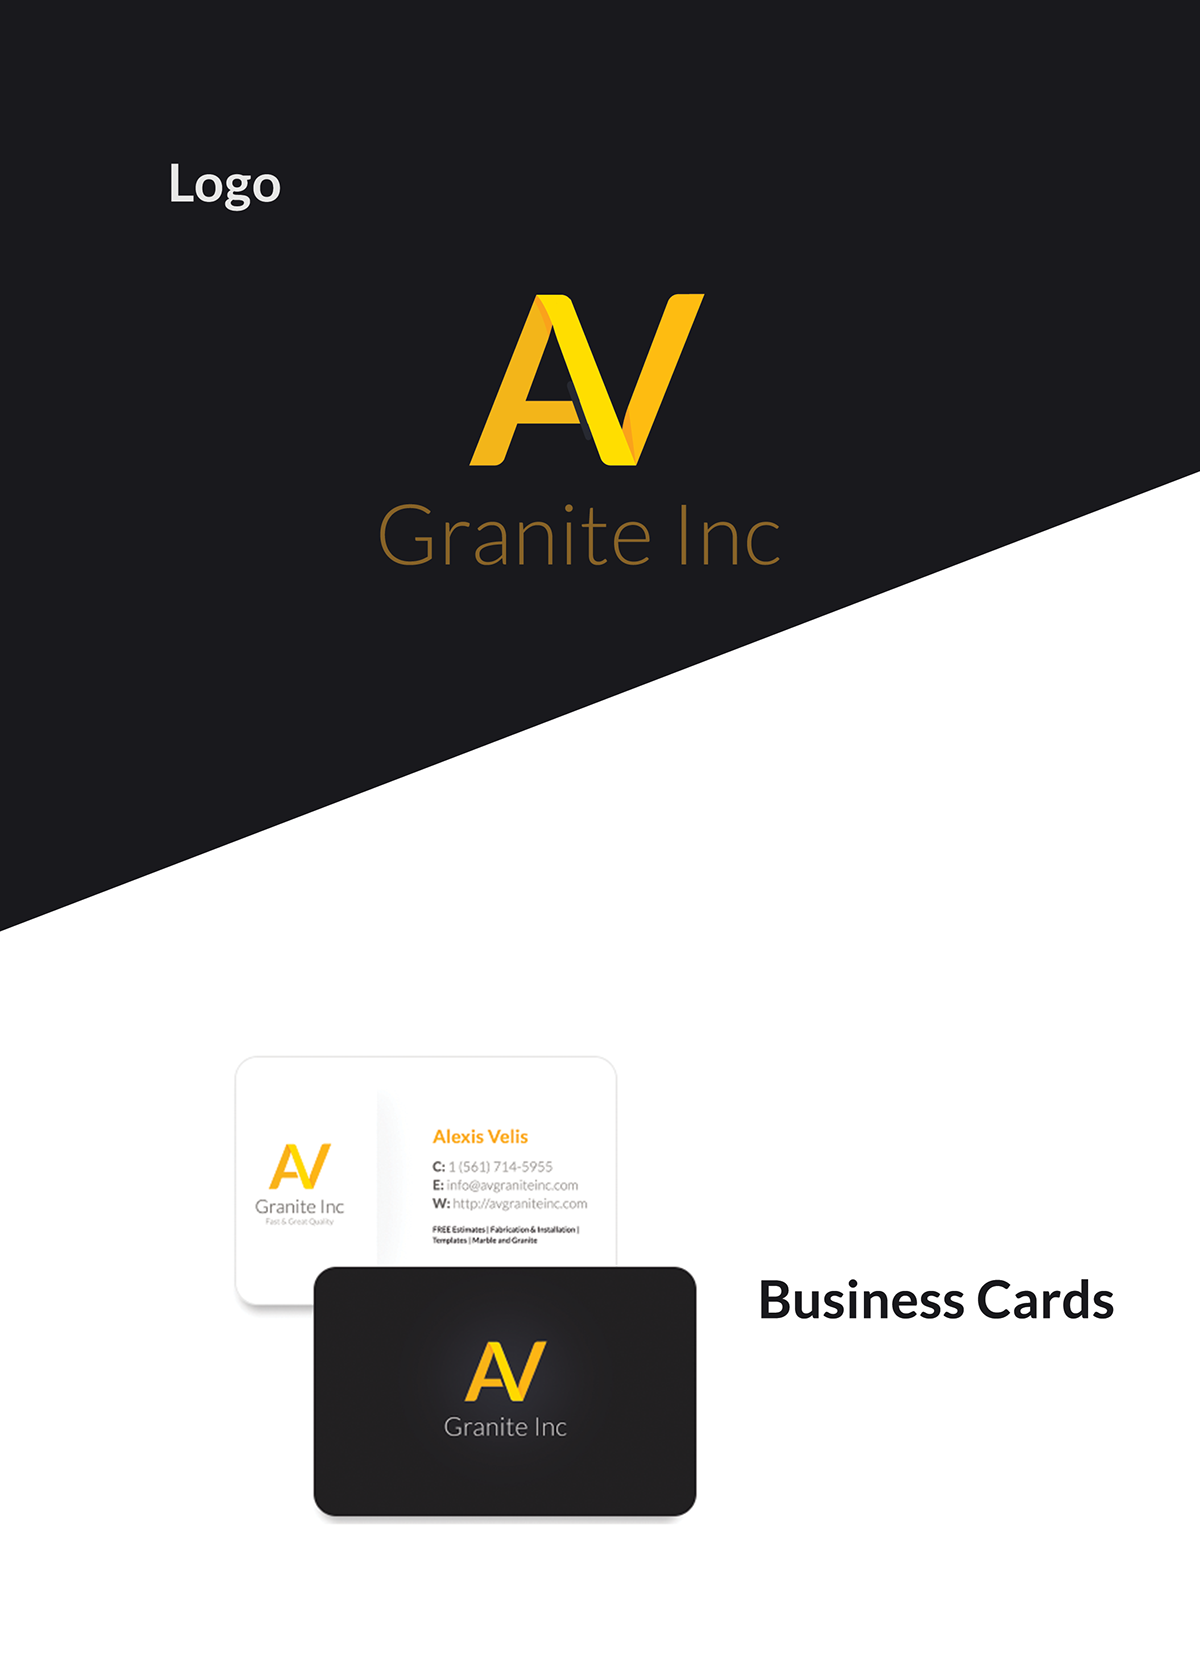 business card logo Clean Design graphic yellow letter logo Modern Logo typography logo valentina cunsolo